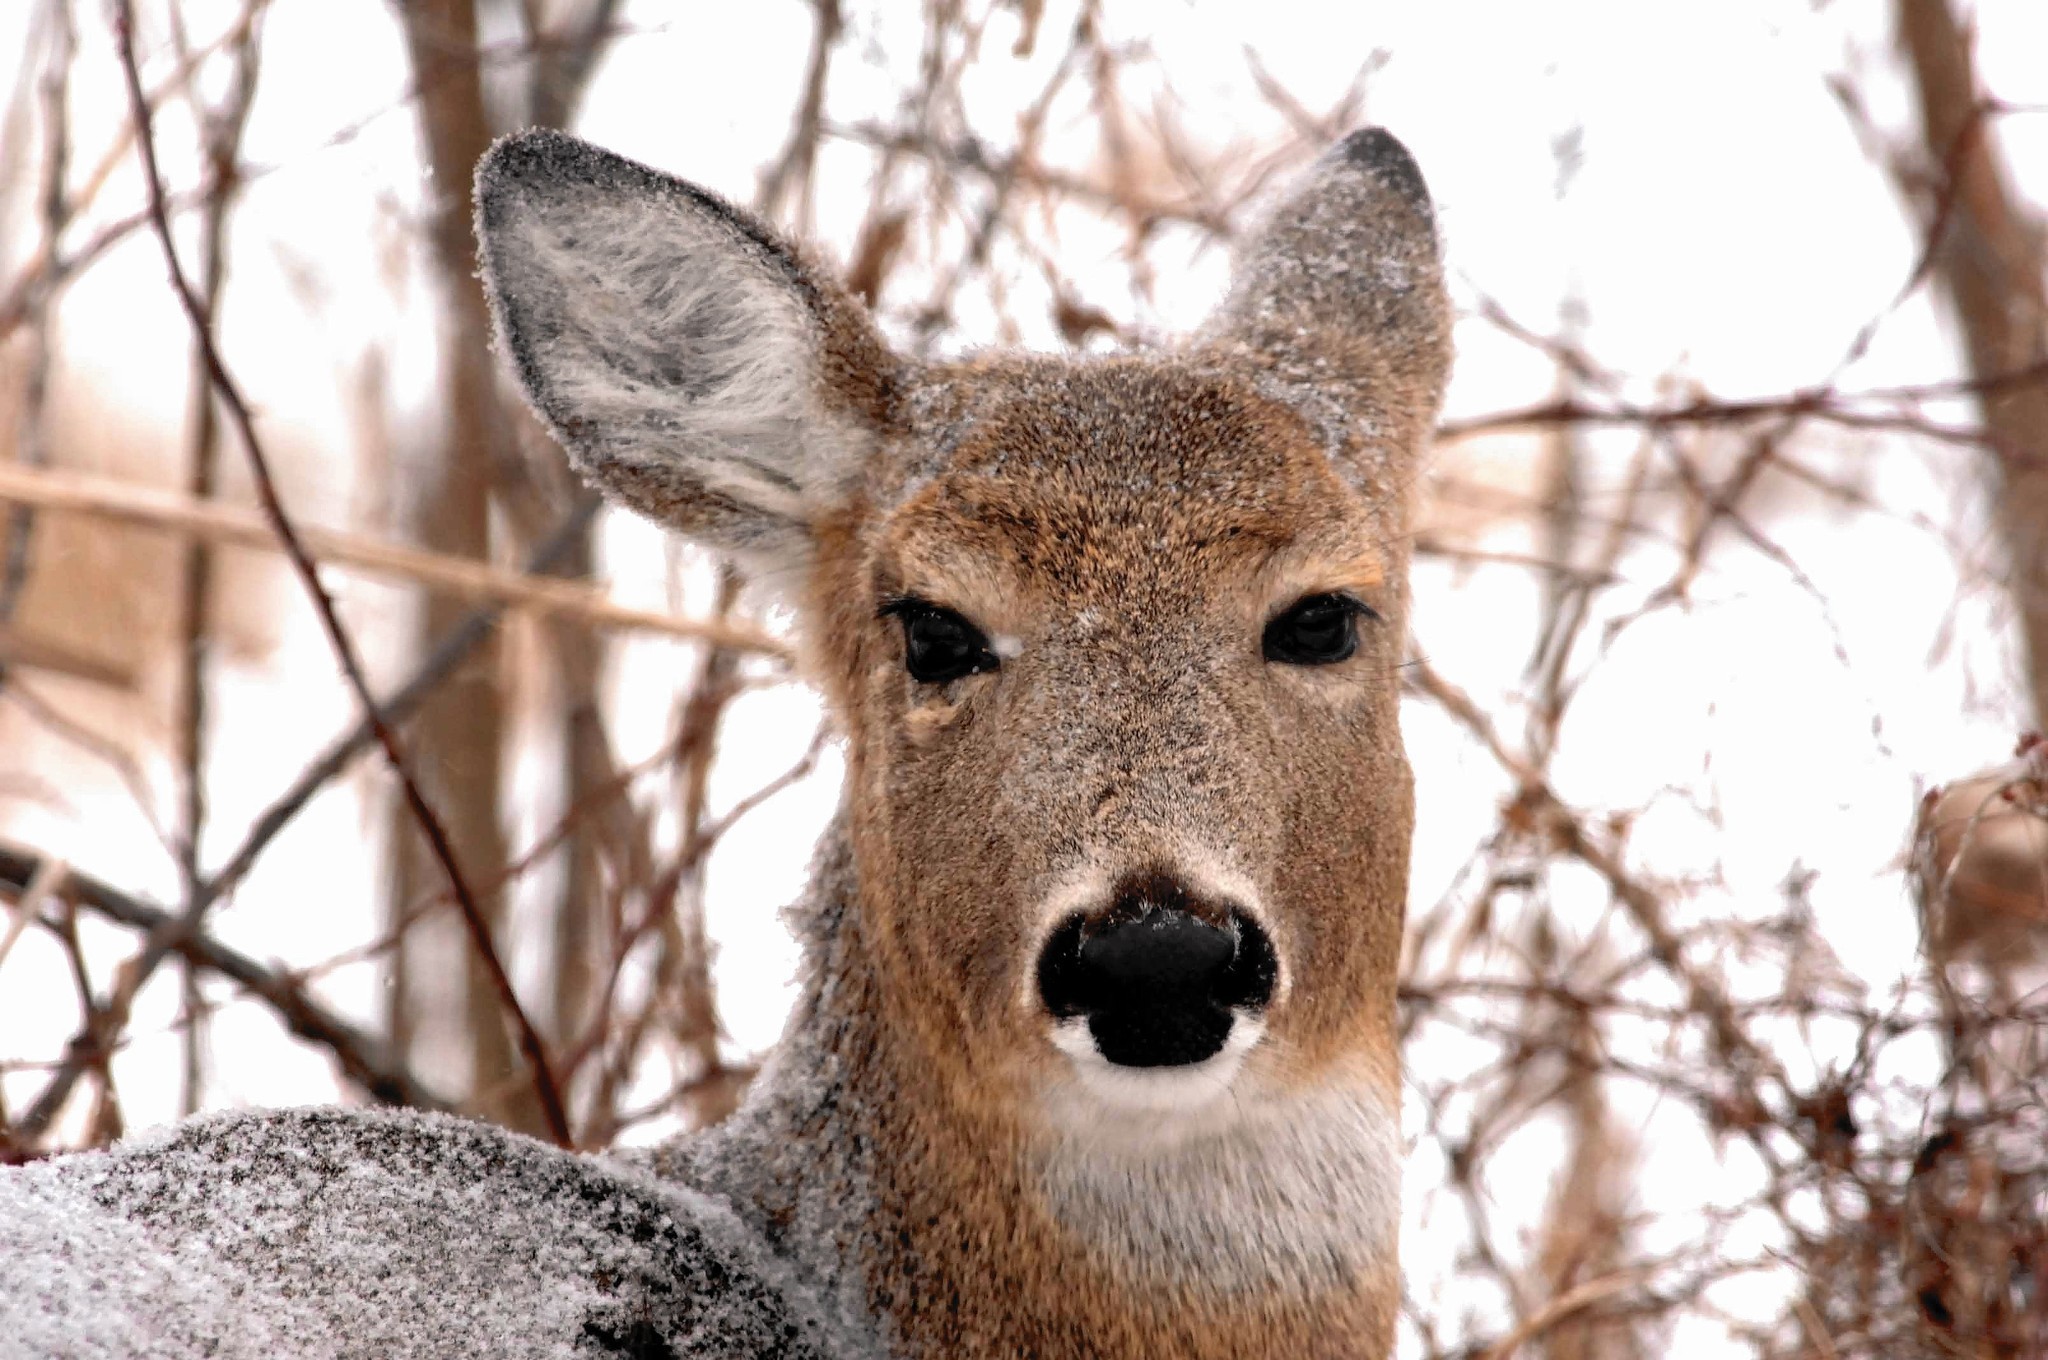 Hungry deer can pose threat to shrubs, trees - Chicago Tribune